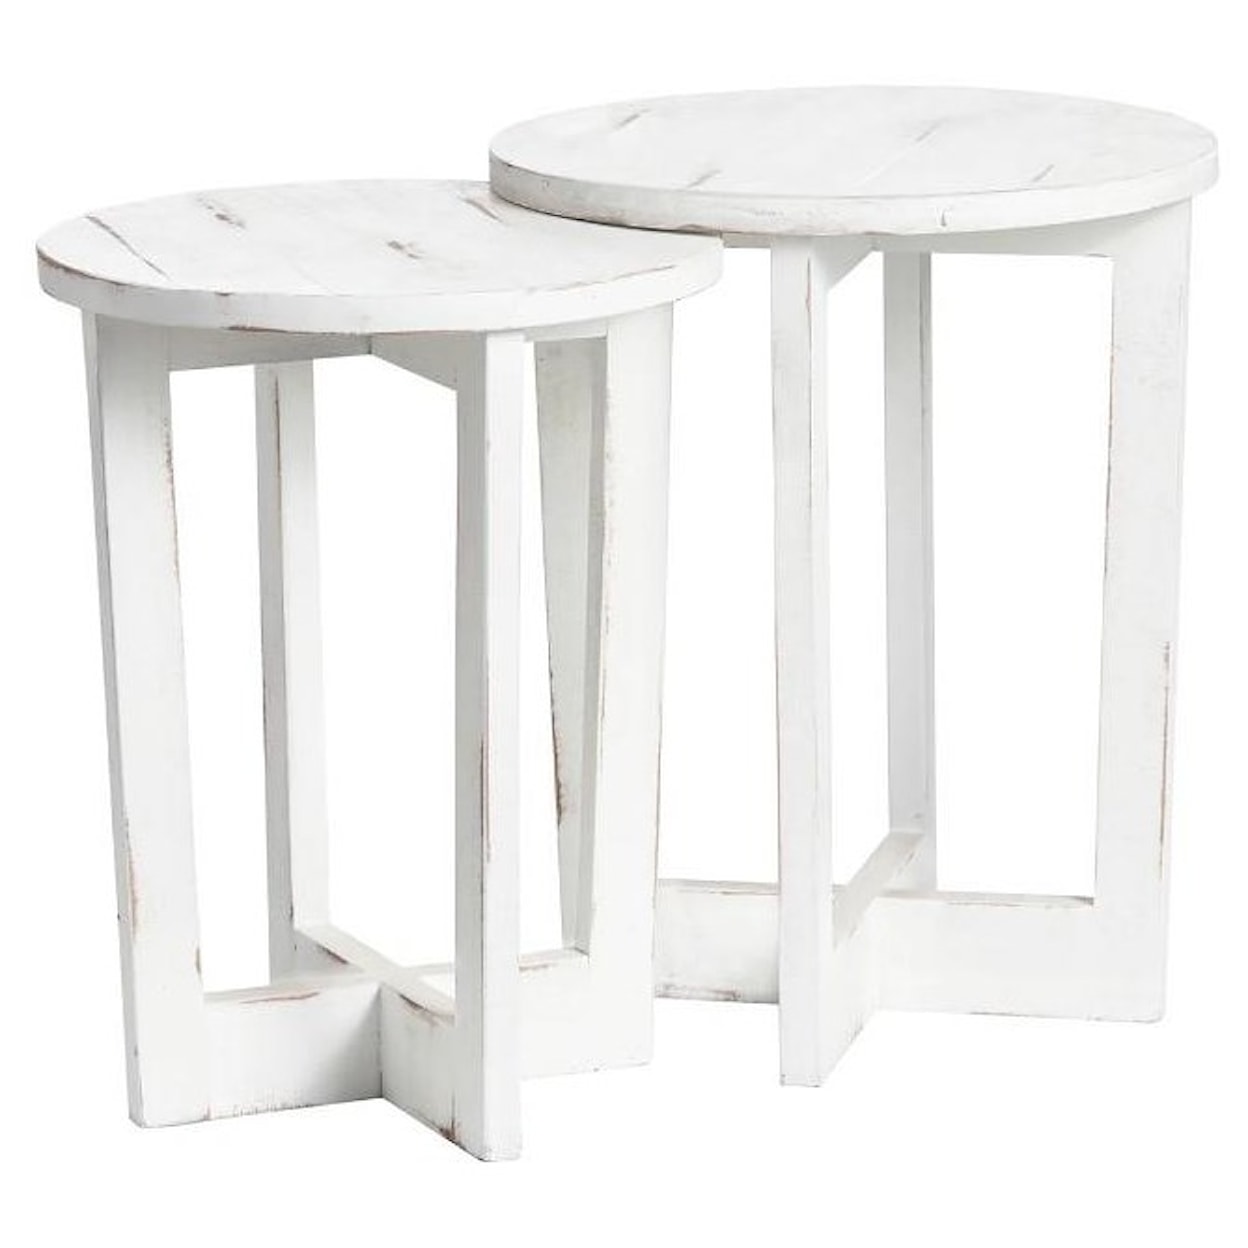 Crestview Collection Accent Furniture Set of 2 Nesting Tables